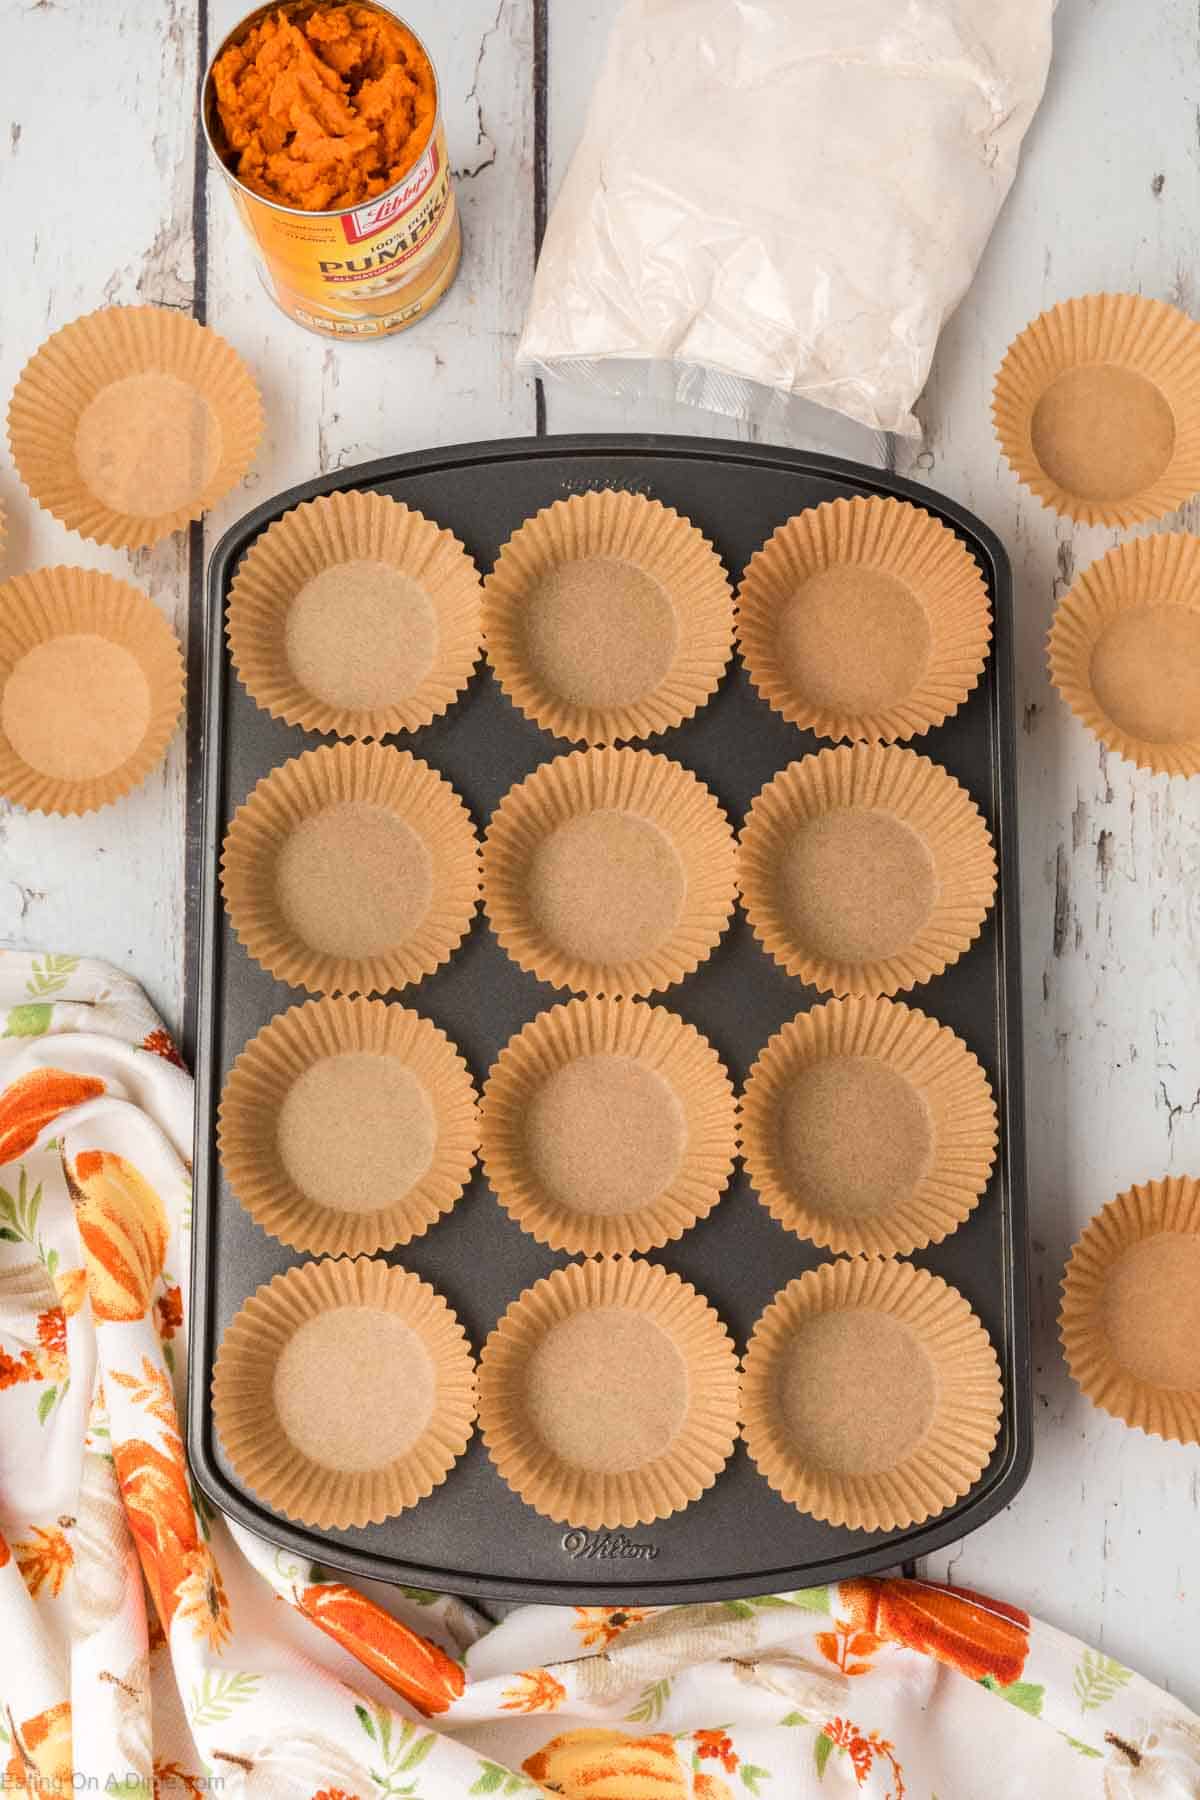 A muffin tin filled with brown paper cupcake liners is centered on a light wooden table. Surrounding the tin are a can of pumpkin puree, a bag of flour, scattered cupcake liners, and a floral-patterned cloth. The baking setup suggests preparation for 2 Ingredient Pumpkin Muffins.